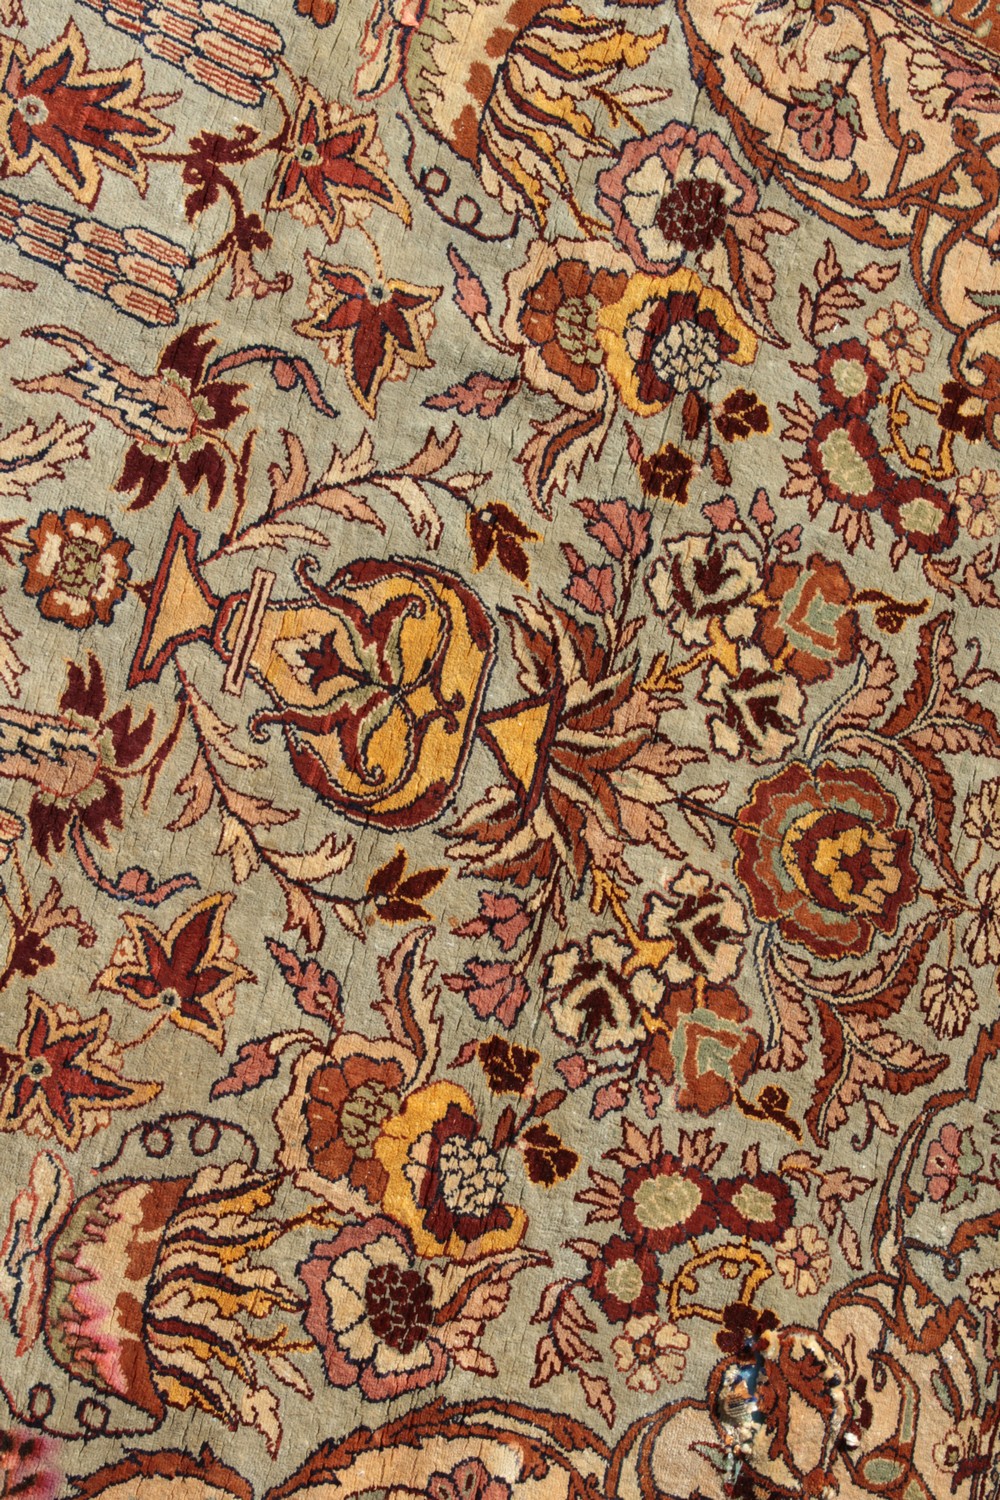 A FINE TURKISH SILK RUG with allover pattern of birds and flowers. 6ft 10ins x 4ft 3ins. - Image 6 of 17